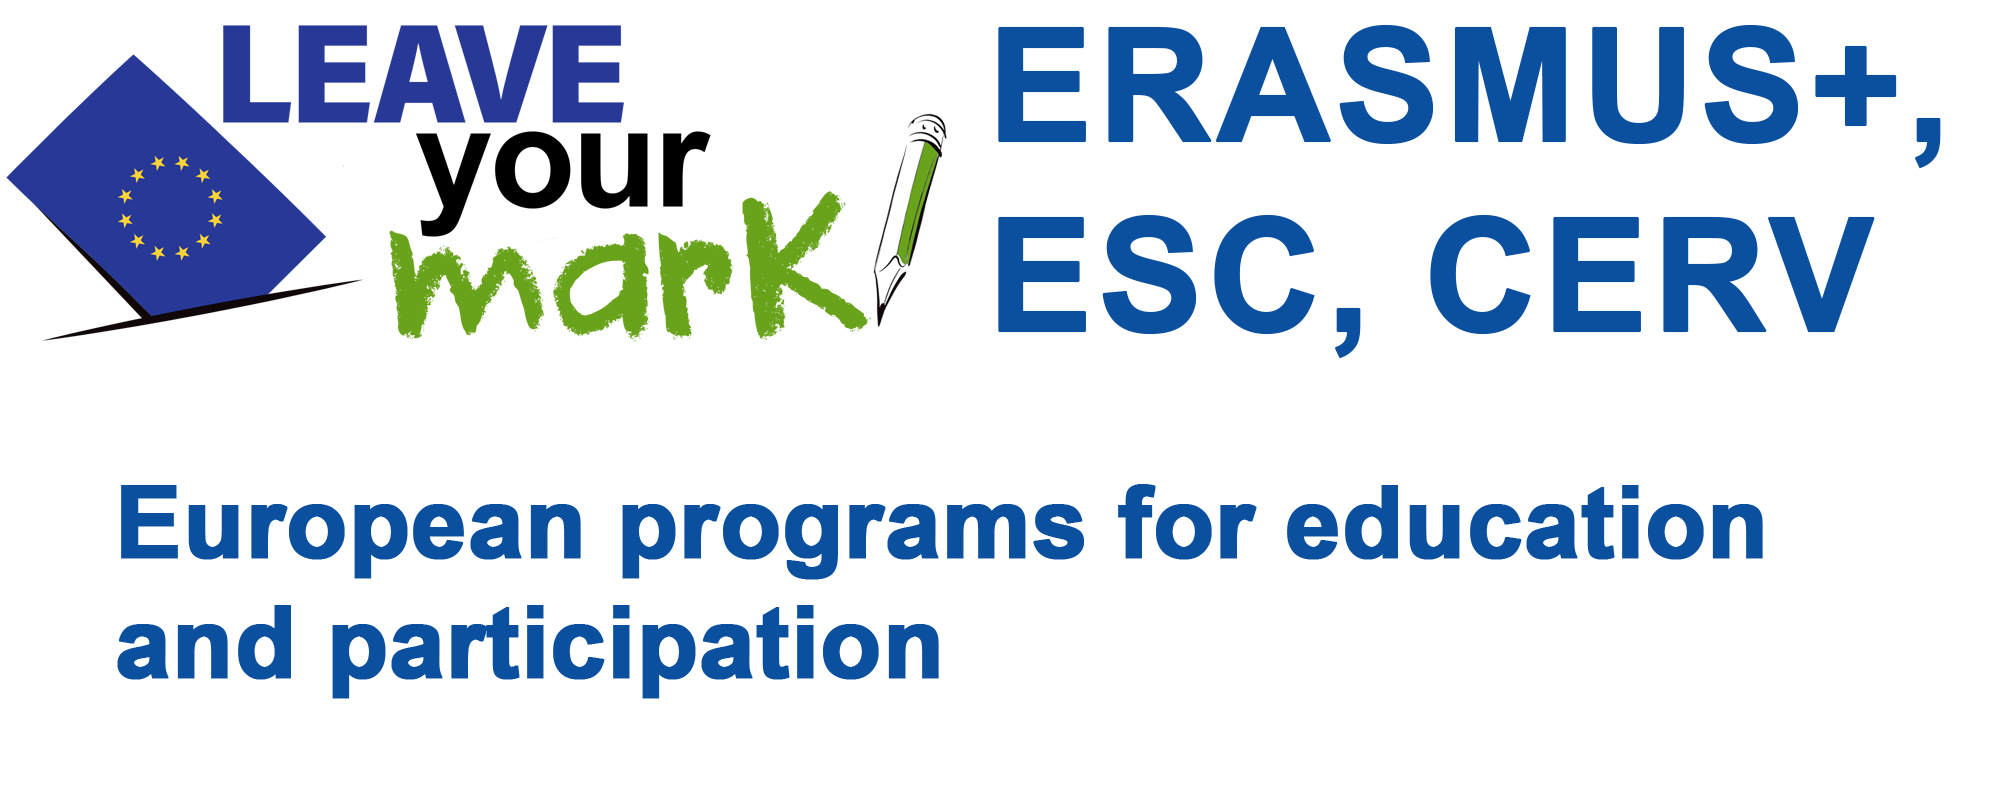 European programs for education and participation